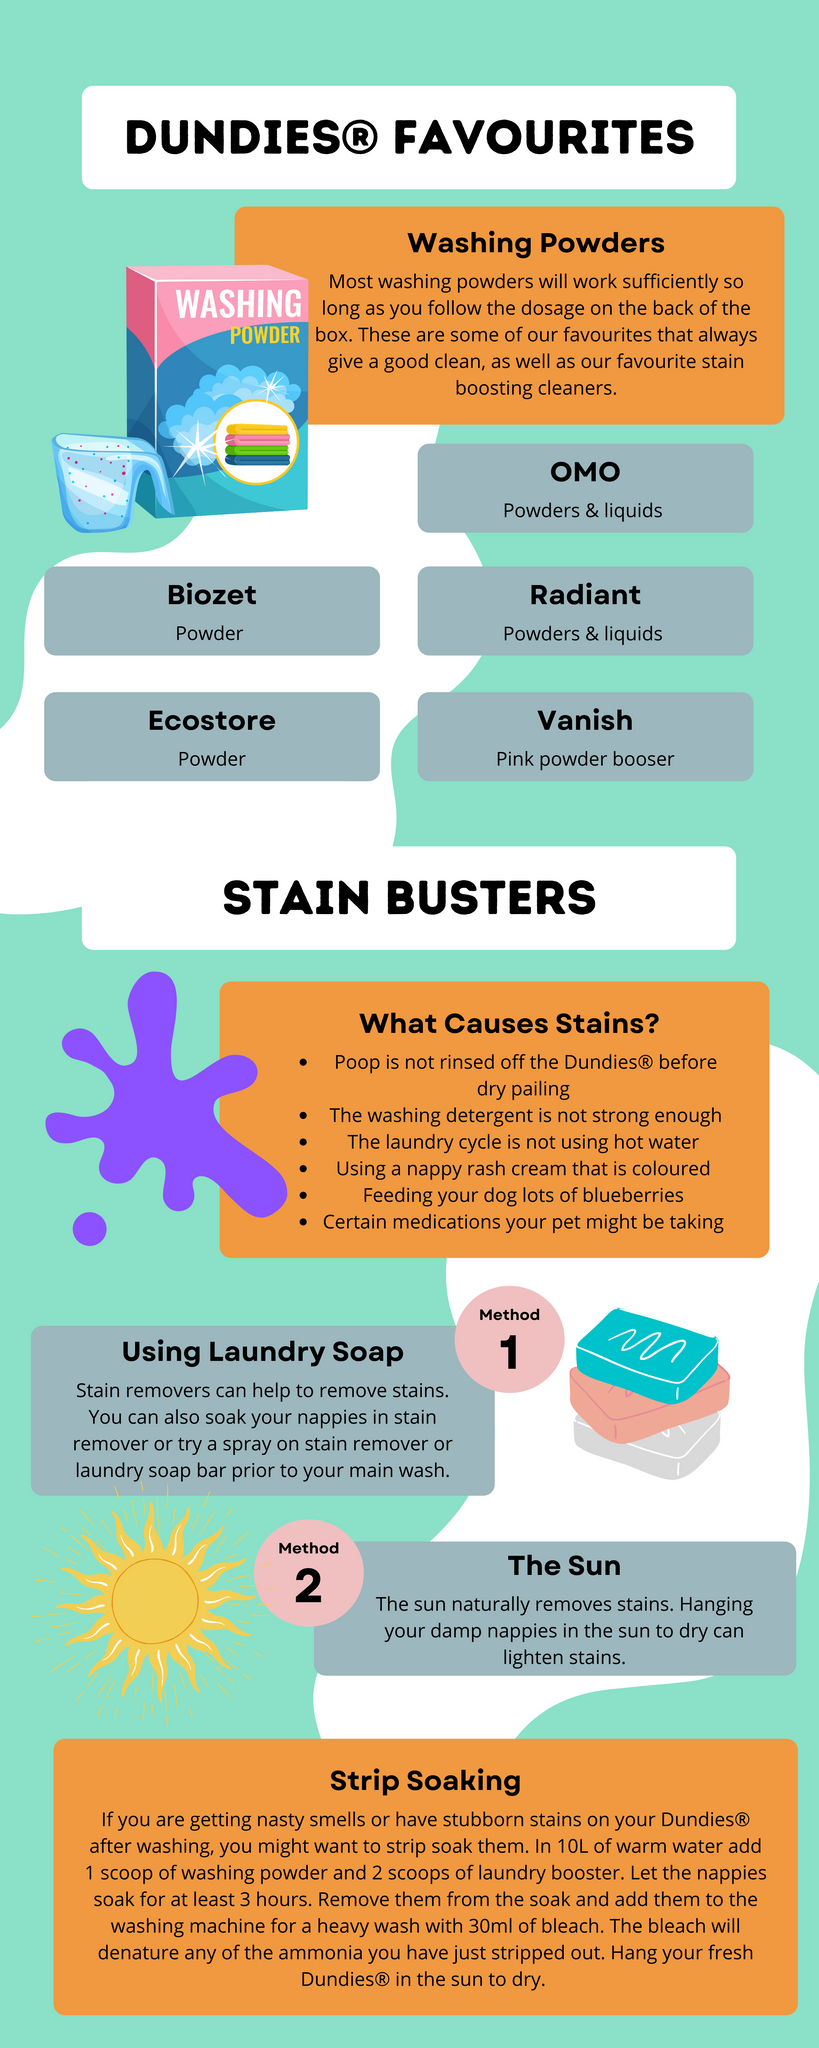 Dundies Stain Buster